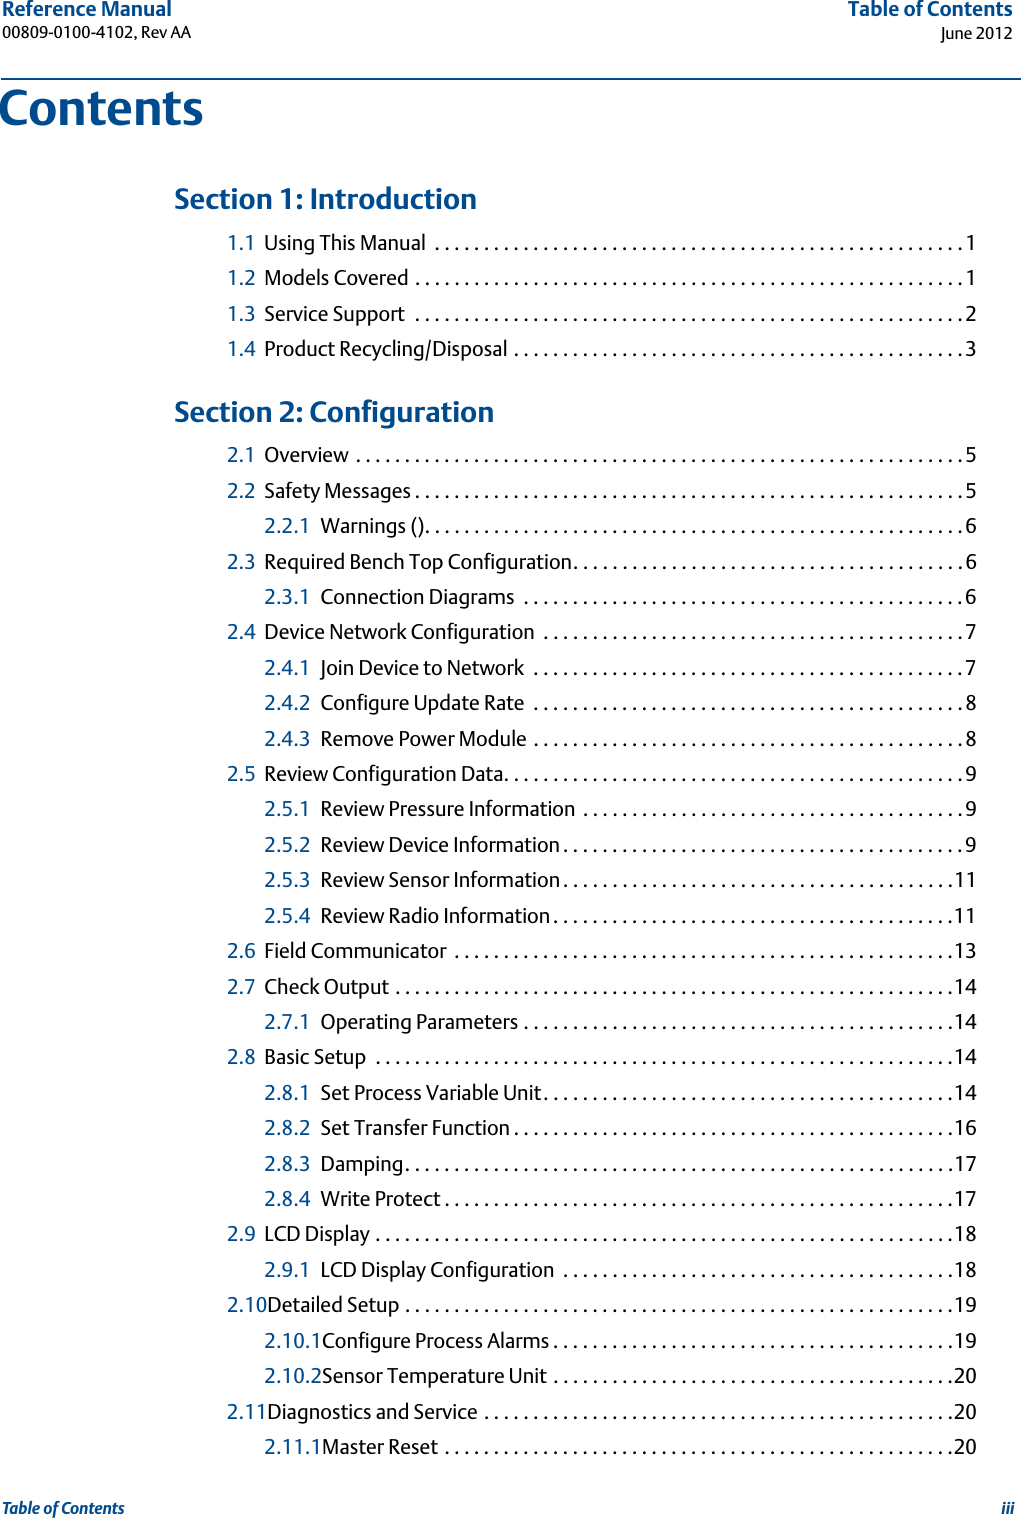 iiiReference Manual 00809-0100-4102, Rev AATable of ContentsJune 2012Table of Contents 1Section 1: Introduction1.1 Using This Manual  . . . . . . . . . . . . . . . . . . . . . . . . . . . . . . . . . . . . . . . . . . . . . . . . . . . . . .11.2 Models Covered . . . . . . . . . . . . . . . . . . . . . . . . . . . . . . . . . . . . . . . . . . . . . . . . . . . . . . . .11.3 Service Support  . . . . . . . . . . . . . . . . . . . . . . . . . . . . . . . . . . . . . . . . . . . . . . . . . . . . . . . .21.4 Product Recycling/Disposal . . . . . . . . . . . . . . . . . . . . . . . . . . . . . . . . . . . . . . . . . . . . . .3 2Section 2: Configuration2.1 Overview . . . . . . . . . . . . . . . . . . . . . . . . . . . . . . . . . . . . . . . . . . . . . . . . . . . . . . . . . . . . . .52.2 Safety Messages . . . . . . . . . . . . . . . . . . . . . . . . . . . . . . . . . . . . . . . . . . . . . . . . . . . . . . . .52.2.1 Warnings (). . . . . . . . . . . . . . . . . . . . . . . . . . . . . . . . . . . . . . . . . . . . . . . . . . . . . . .62.3 Required Bench Top Configuration. . . . . . . . . . . . . . . . . . . . . . . . . . . . . . . . . . . . . . . .62.3.1 Connection Diagrams  . . . . . . . . . . . . . . . . . . . . . . . . . . . . . . . . . . . . . . . . . . . . .62.4 Device Network Configuration  . . . . . . . . . . . . . . . . . . . . . . . . . . . . . . . . . . . . . . . . . . .72.4.1 Join Device to Network  . . . . . . . . . . . . . . . . . . . . . . . . . . . . . . . . . . . . . . . . . . . .72.4.2 Configure Update Rate  . . . . . . . . . . . . . . . . . . . . . . . . . . . . . . . . . . . . . . . . . . . .82.4.3 Remove Power Module . . . . . . . . . . . . . . . . . . . . . . . . . . . . . . . . . . . . . . . . . . . .82.5 Review Configuration Data. . . . . . . . . . . . . . . . . . . . . . . . . . . . . . . . . . . . . . . . . . . . . . .92.5.1 Review Pressure Information . . . . . . . . . . . . . . . . . . . . . . . . . . . . . . . . . . . . . . .92.5.2 Review Device Information. . . . . . . . . . . . . . . . . . . . . . . . . . . . . . . . . . . . . . . . .92.5.3 Review Sensor Information. . . . . . . . . . . . . . . . . . . . . . . . . . . . . . . . . . . . . . . .112.5.4 Review Radio Information. . . . . . . . . . . . . . . . . . . . . . . . . . . . . . . . . . . . . . . . .112.6 Field Communicator  . . . . . . . . . . . . . . . . . . . . . . . . . . . . . . . . . . . . . . . . . . . . . . . . . . .132.7 Check Output . . . . . . . . . . . . . . . . . . . . . . . . . . . . . . . . . . . . . . . . . . . . . . . . . . . . . . . . .142.7.1 Operating Parameters . . . . . . . . . . . . . . . . . . . . . . . . . . . . . . . . . . . . . . . . . . . .142.8 Basic Setup  . . . . . . . . . . . . . . . . . . . . . . . . . . . . . . . . . . . . . . . . . . . . . . . . . . . . . . . . . . .142.8.1 Set Process Variable Unit. . . . . . . . . . . . . . . . . . . . . . . . . . . . . . . . . . . . . . . . . .142.8.2 Set Transfer Function . . . . . . . . . . . . . . . . . . . . . . . . . . . . . . . . . . . . . . . . . . . . .162.8.3 Damping. . . . . . . . . . . . . . . . . . . . . . . . . . . . . . . . . . . . . . . . . . . . . . . . . . . . . . . .172.8.4 Write Protect . . . . . . . . . . . . . . . . . . . . . . . . . . . . . . . . . . . . . . . . . . . . . . . . . . . .172.9 LCD Display . . . . . . . . . . . . . . . . . . . . . . . . . . . . . . . . . . . . . . . . . . . . . . . . . . . . . . . . . . .182.9.1 LCD Display Configuration  . . . . . . . . . . . . . . . . . . . . . . . . . . . . . . . . . . . . . . . .182.10Detailed Setup . . . . . . . . . . . . . . . . . . . . . . . . . . . . . . . . . . . . . . . . . . . . . . . . . . . . . . . .192.10.1Configure Process Alarms . . . . . . . . . . . . . . . . . . . . . . . . . . . . . . . . . . . . . . . . .192.10.2Sensor Temperature Unit . . . . . . . . . . . . . . . . . . . . . . . . . . . . . . . . . . . . . . . . .202.11Diagnostics and Service . . . . . . . . . . . . . . . . . . . . . . . . . . . . . . . . . . . . . . . . . . . . . . . .202.11.1Master Reset . . . . . . . . . . . . . . . . . . . . . . . . . . . . . . . . . . . . . . . . . . . . . . . . . . . .20Contents